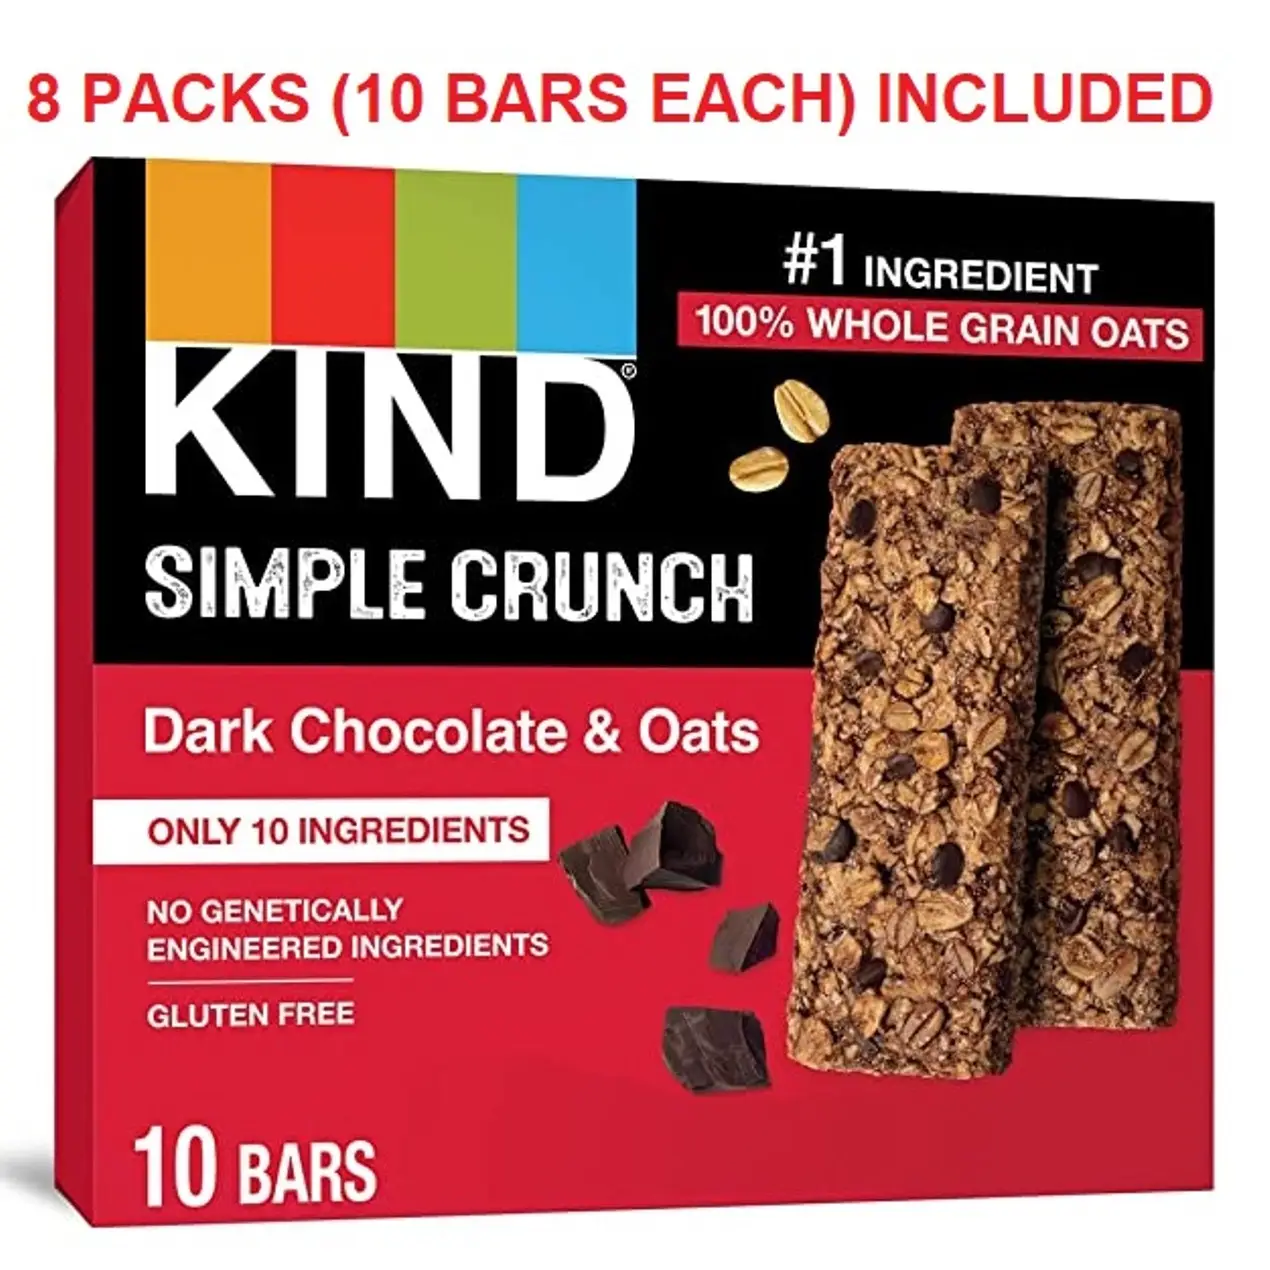 80-Count KIND Simple Crunch Bars (Dark Chocolate & Oats)